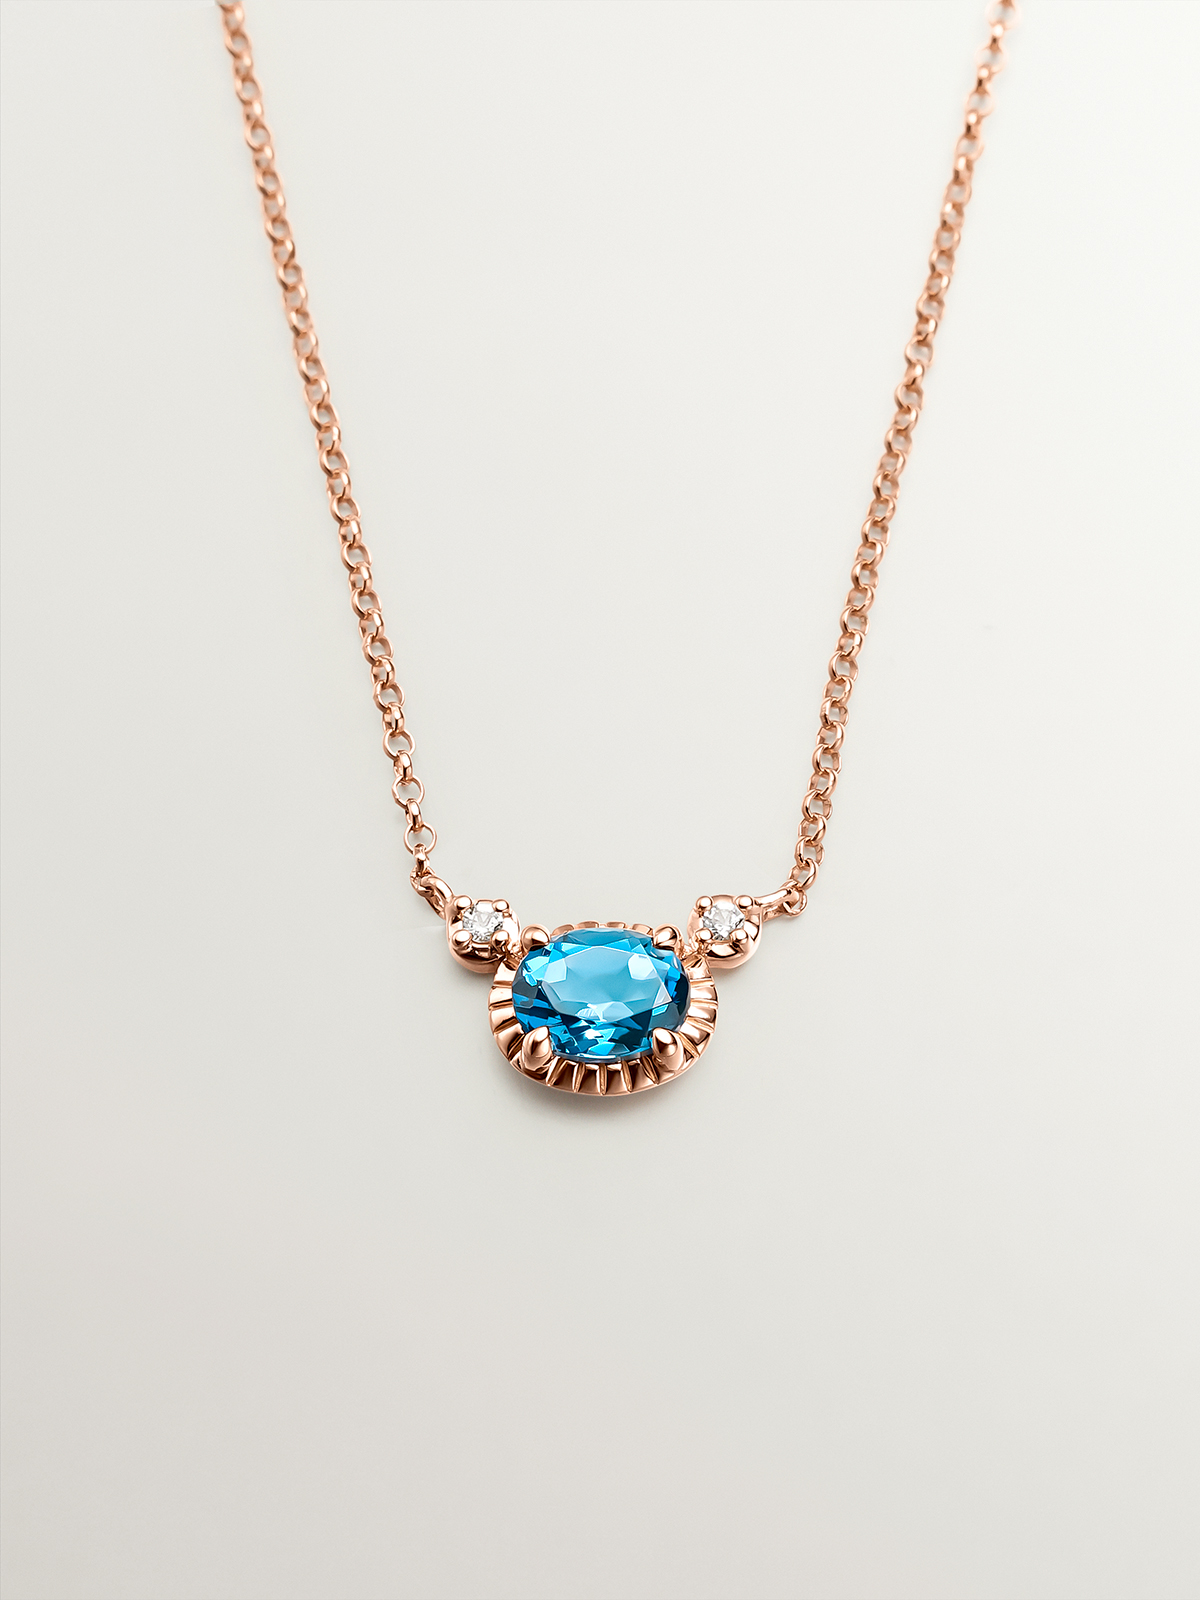 925 Silver pendant dipped in 18K rose gold with London blue and white topazes.